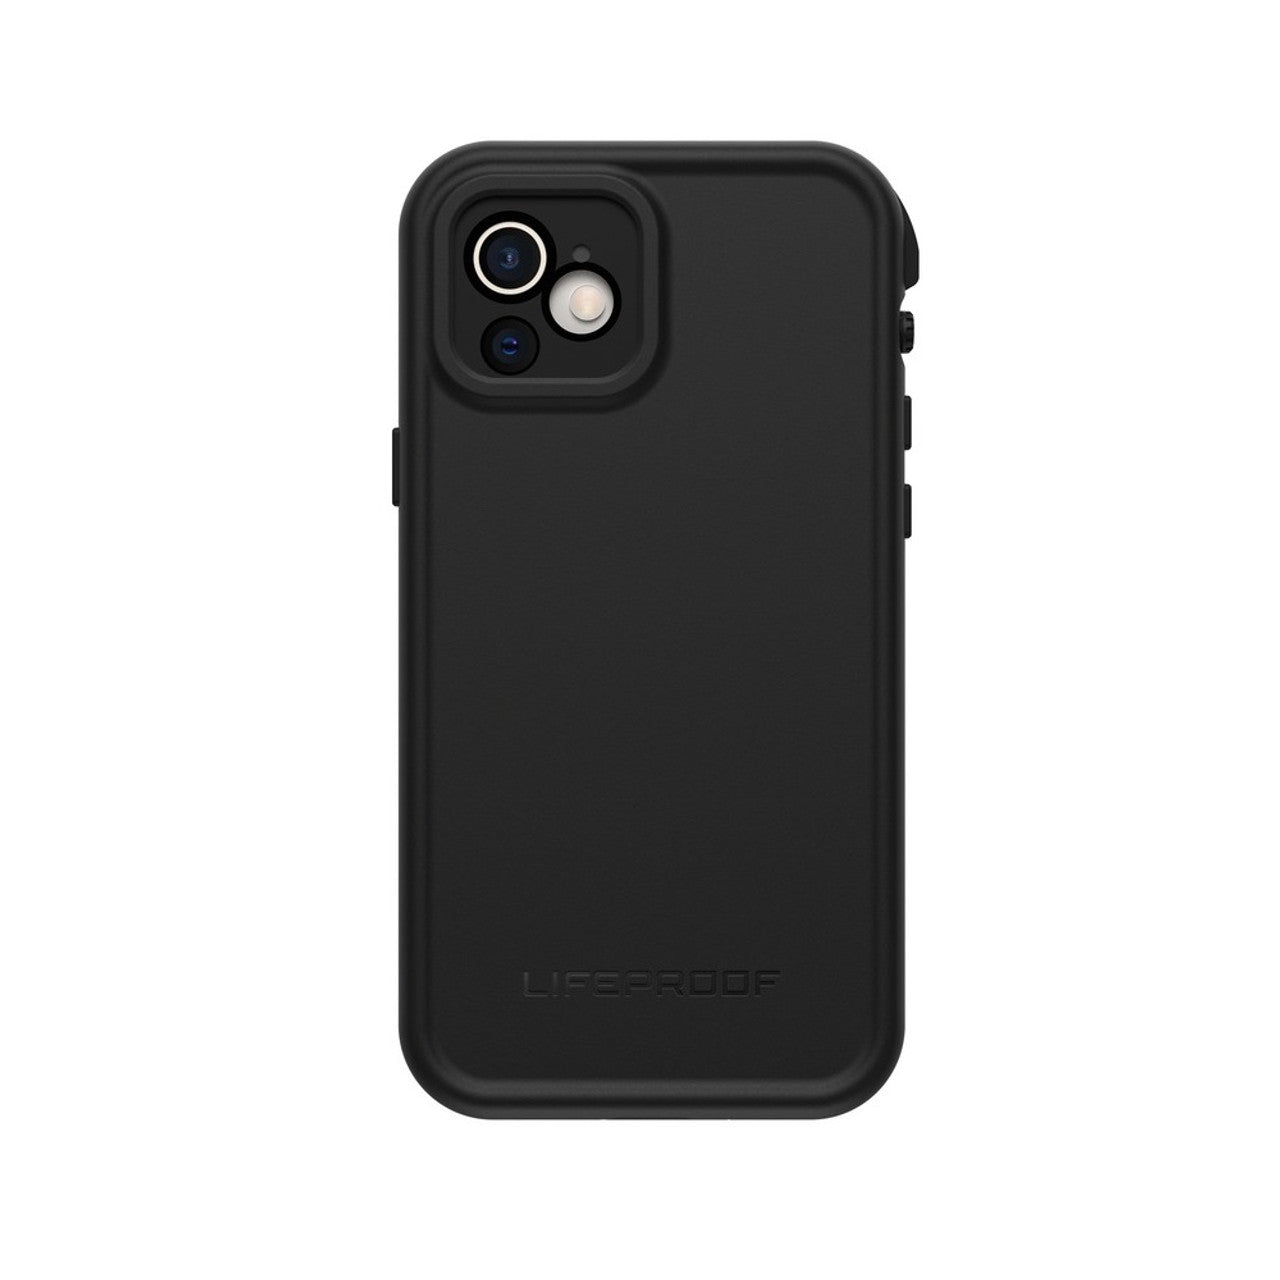 LIFEPROOF FRE CASE FOR IPHONE 12 - BLACK - NEW